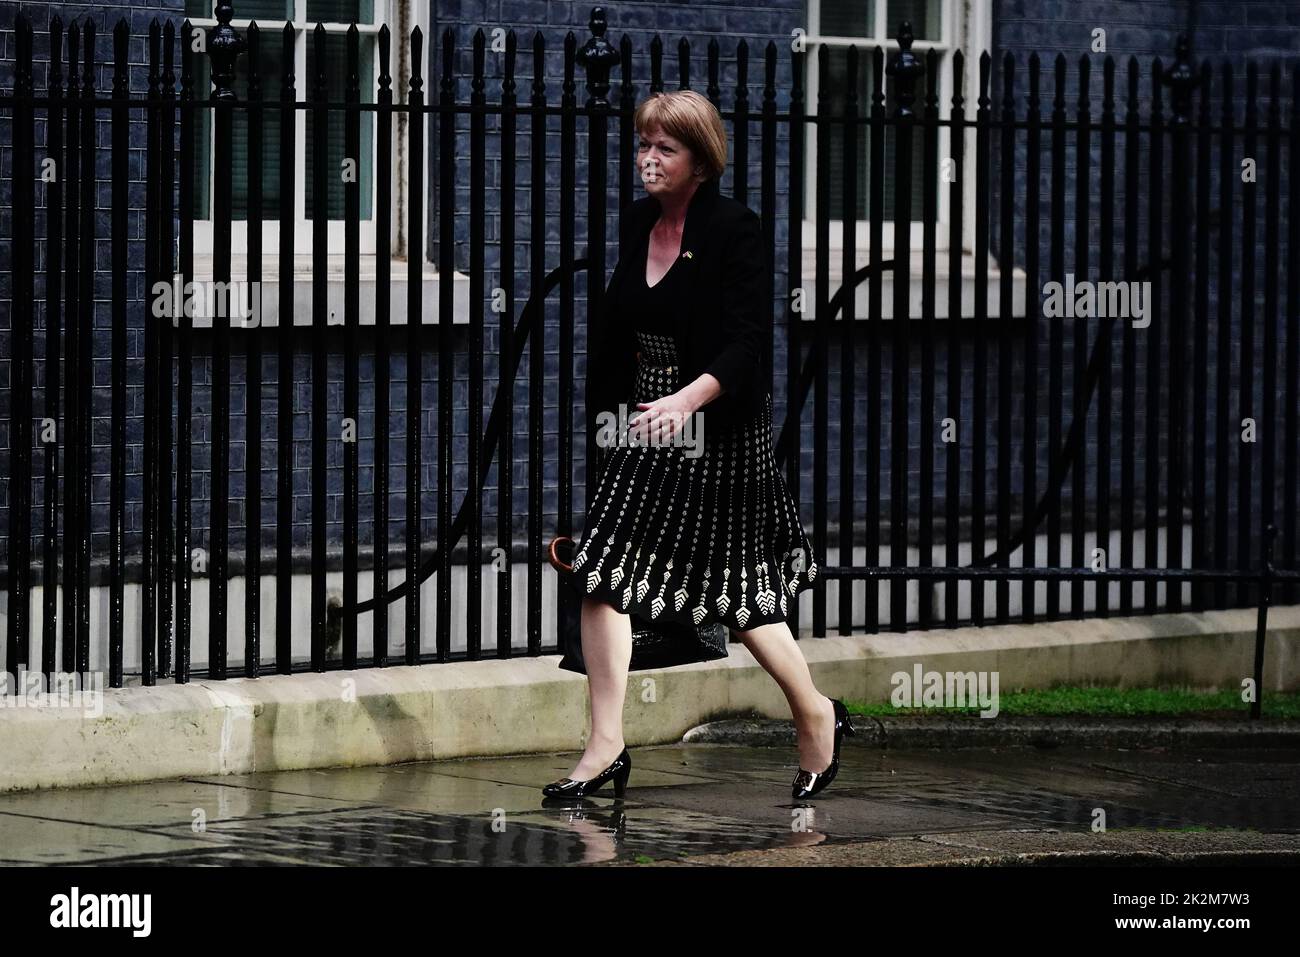 Chief Whip Wendy Morton arrives for a cabinet meeting at 10 Downing Street, London, ahead of a mini-budget announcement by Chancellor of the Exchequer Kwasi Kwarteng. Picture date: Friday September 23, 2022. Stock Photo